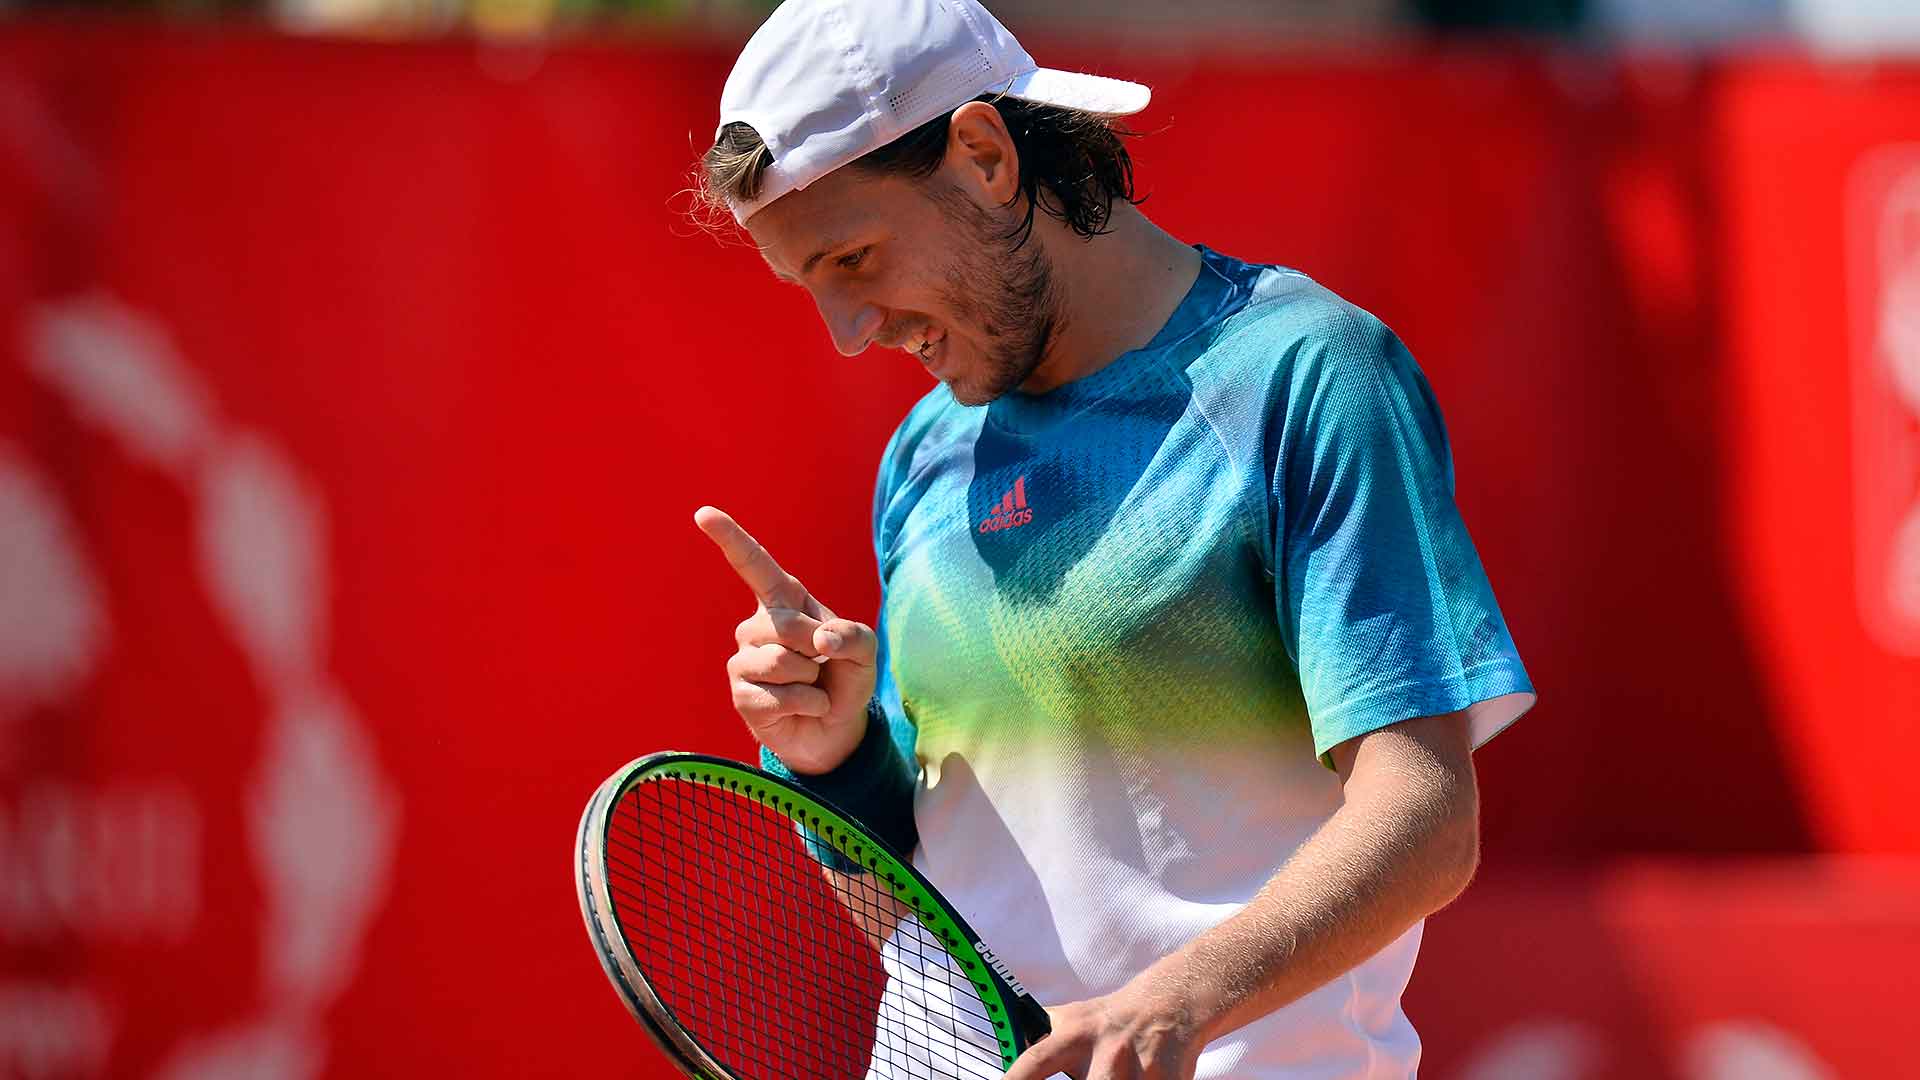 Lucas Pouille is into his first ATP World Tour final.